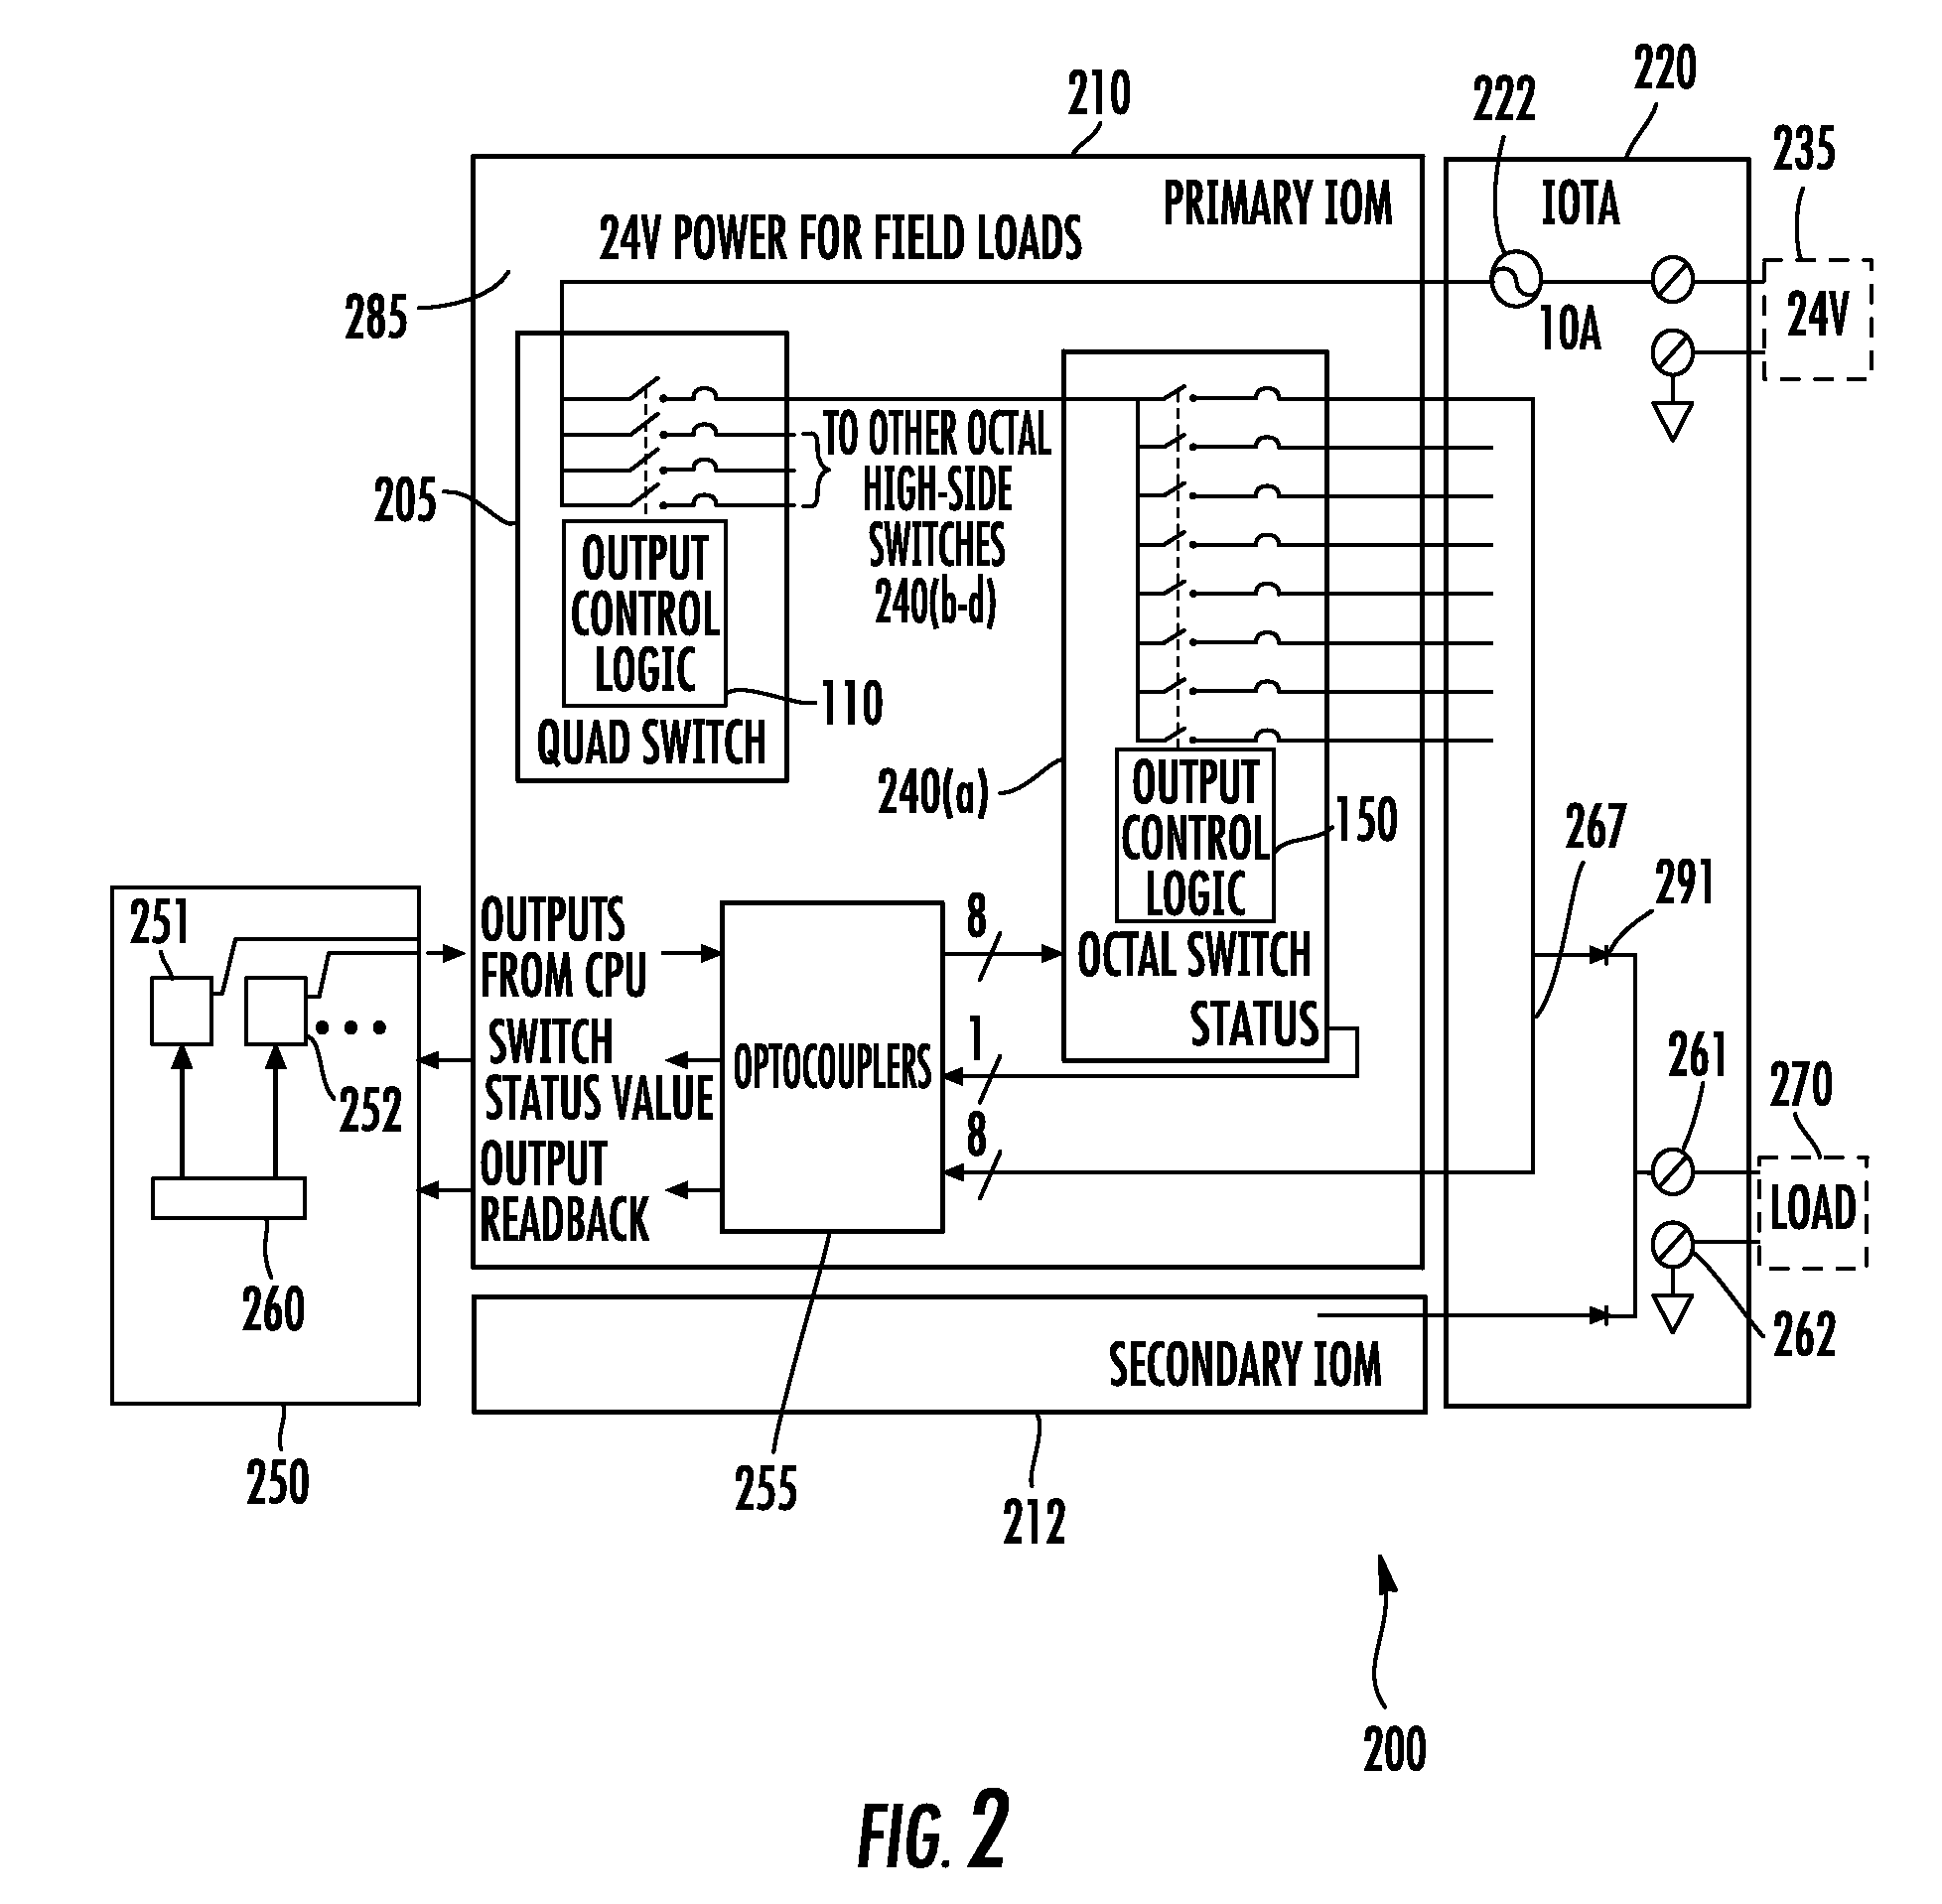 Multi-level electronic protection system providing safe fault recovery for multiple digital control outputs